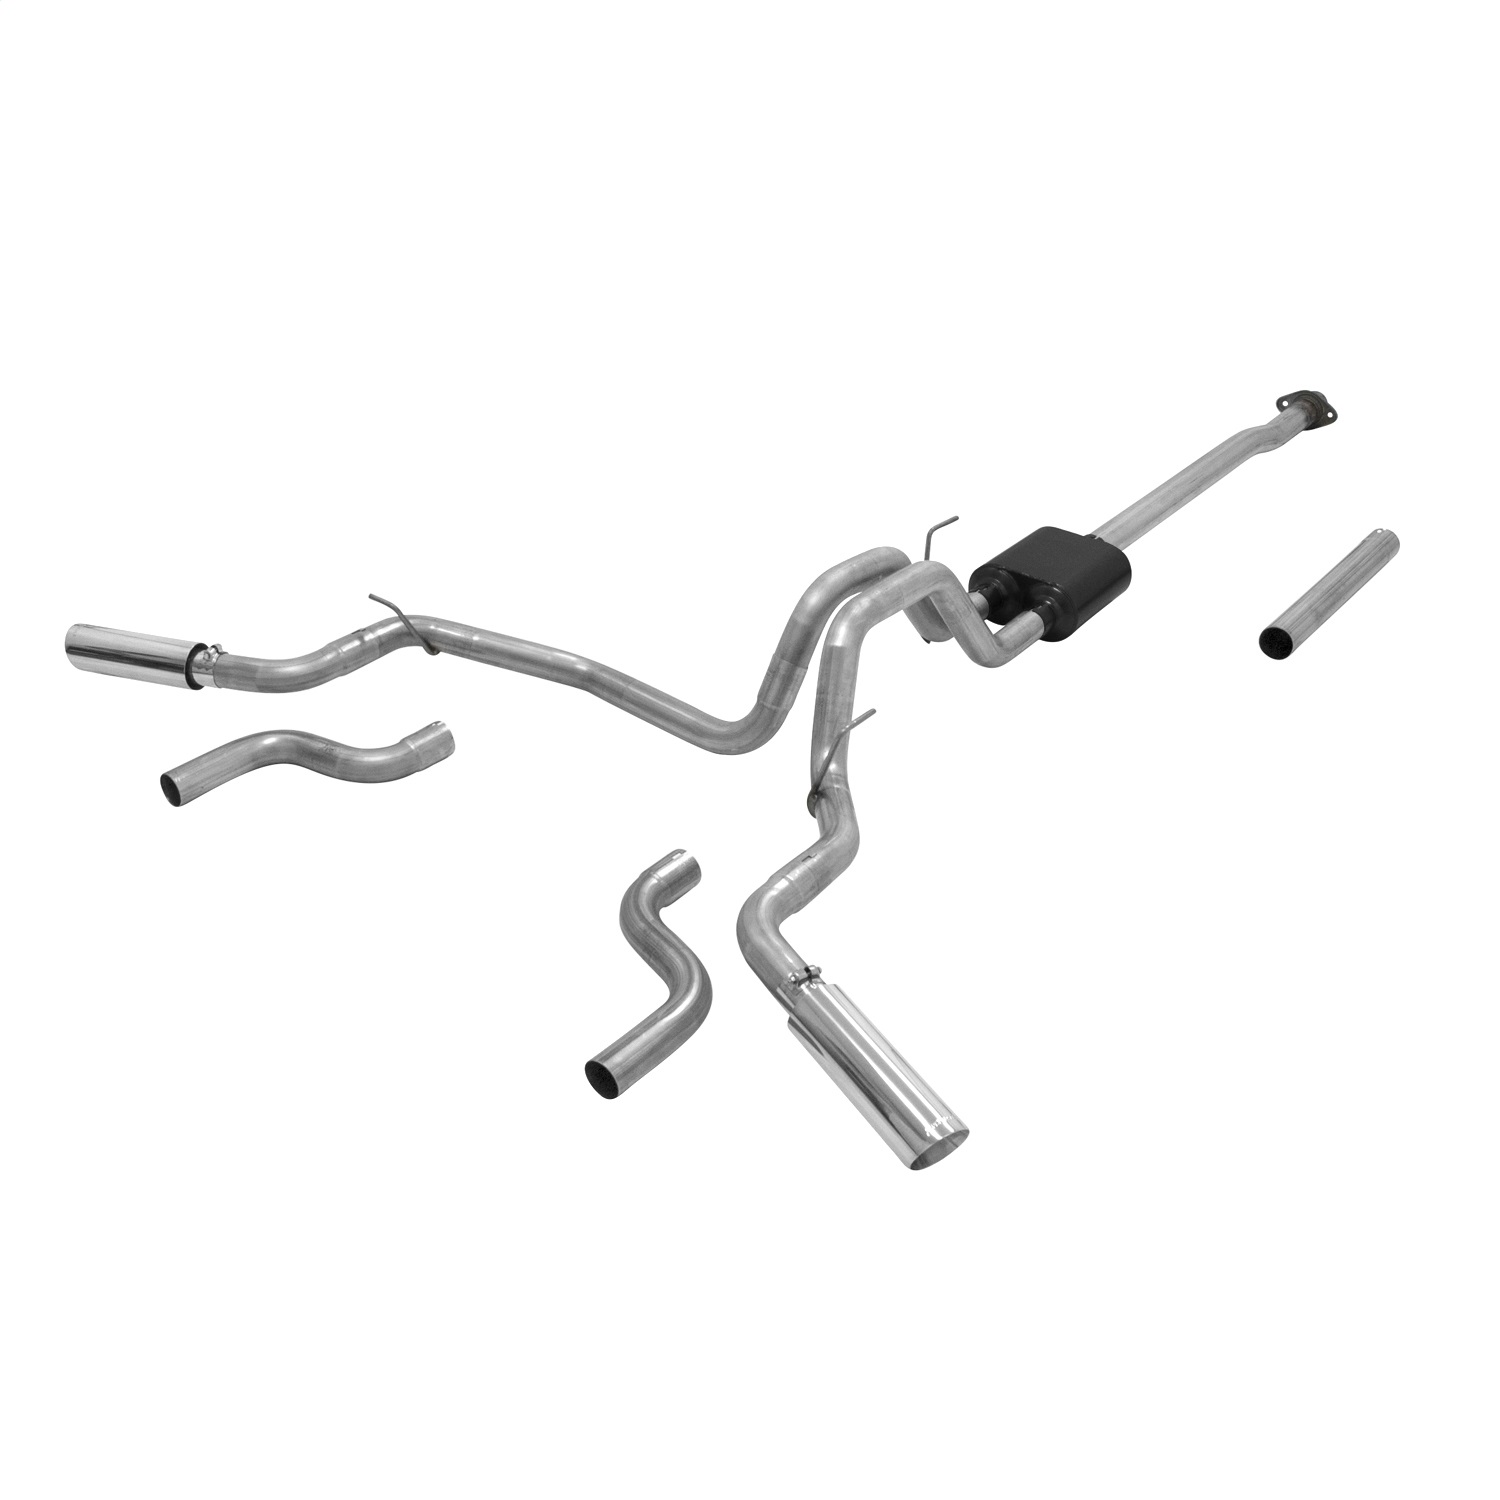 Flowmaster Flowmaster 817725 American Thunder Cat Back Exhaust System Fits 15 F-150